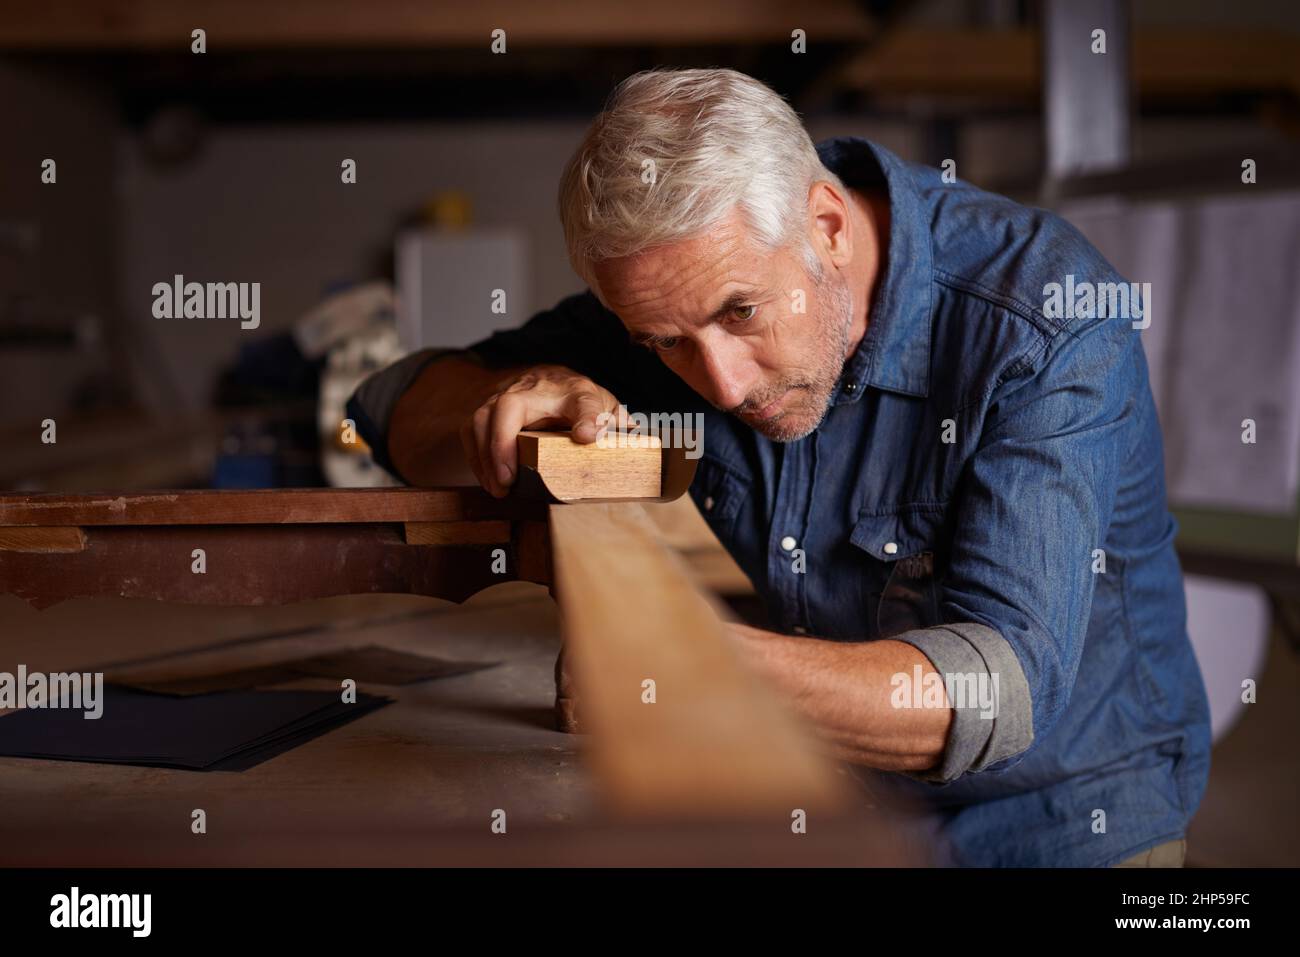 Woodwork pro. Shot of a mature male carpenter working on a project in his workshop. Stock Photo